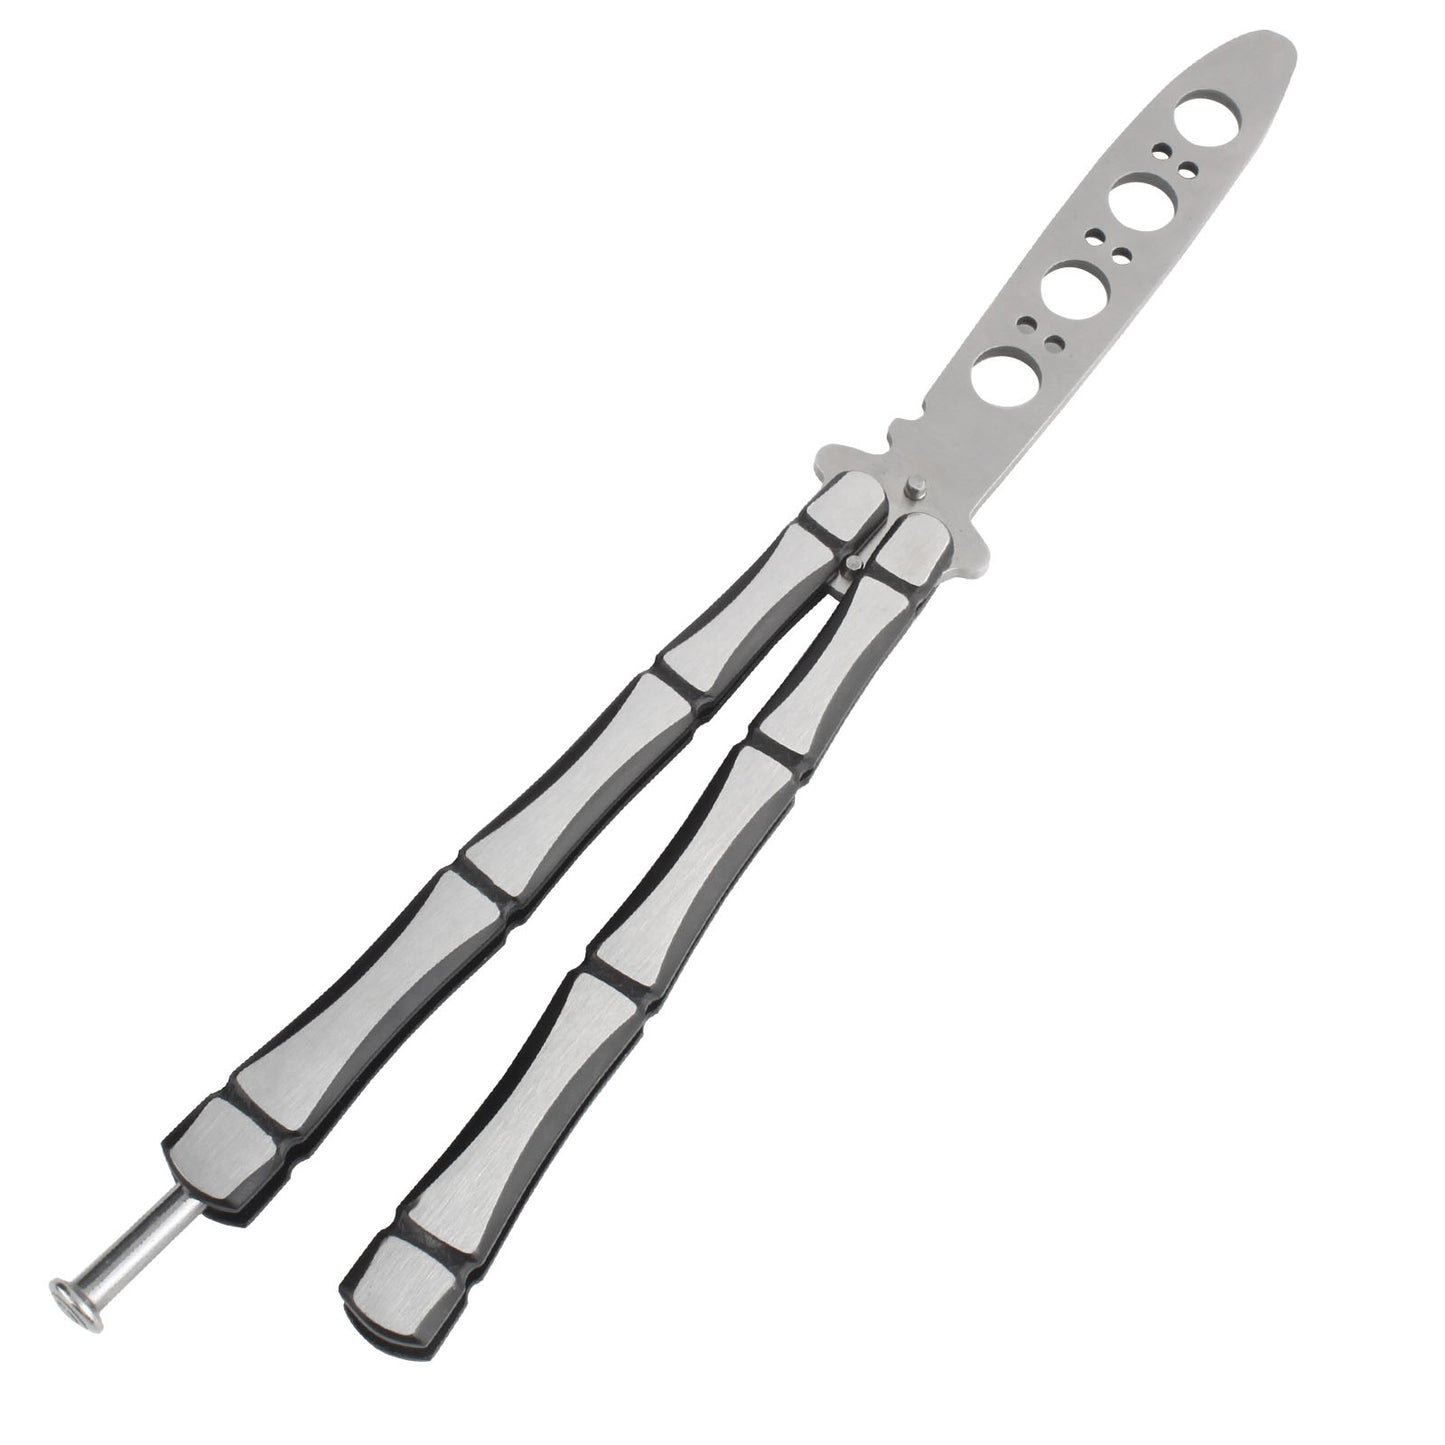 Andux Butterfly Knife Flip Trick Practice Tool CS/HDD08